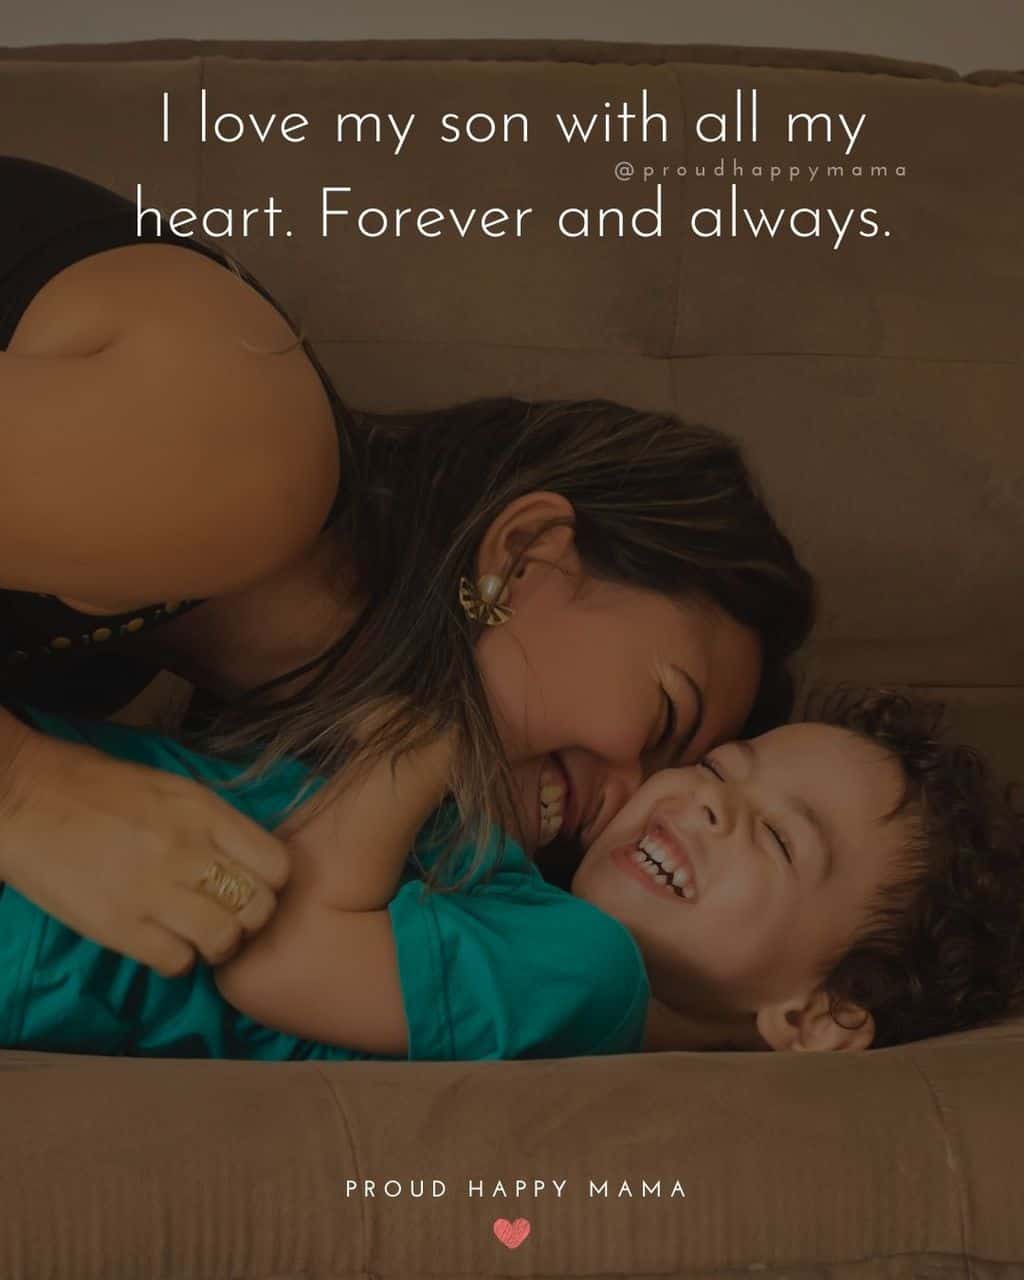 Son Quotes - I love my son with all my heart. Forever and always.’